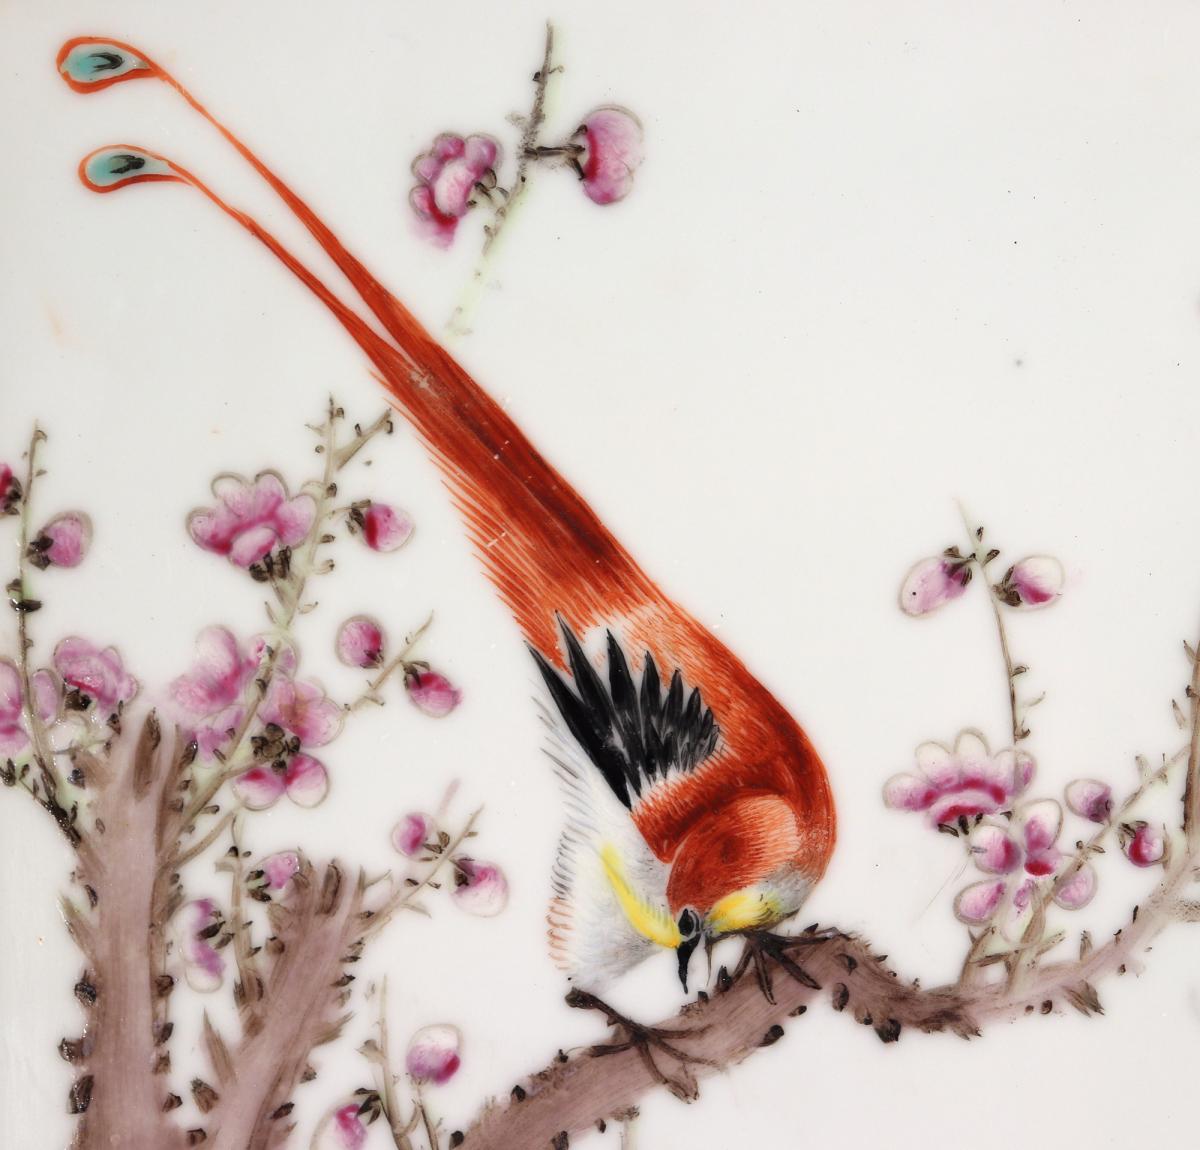 Chinese Porcelain Framed Famille Rose Plaque of Golden Pheasant on a Flowering Tree Branch